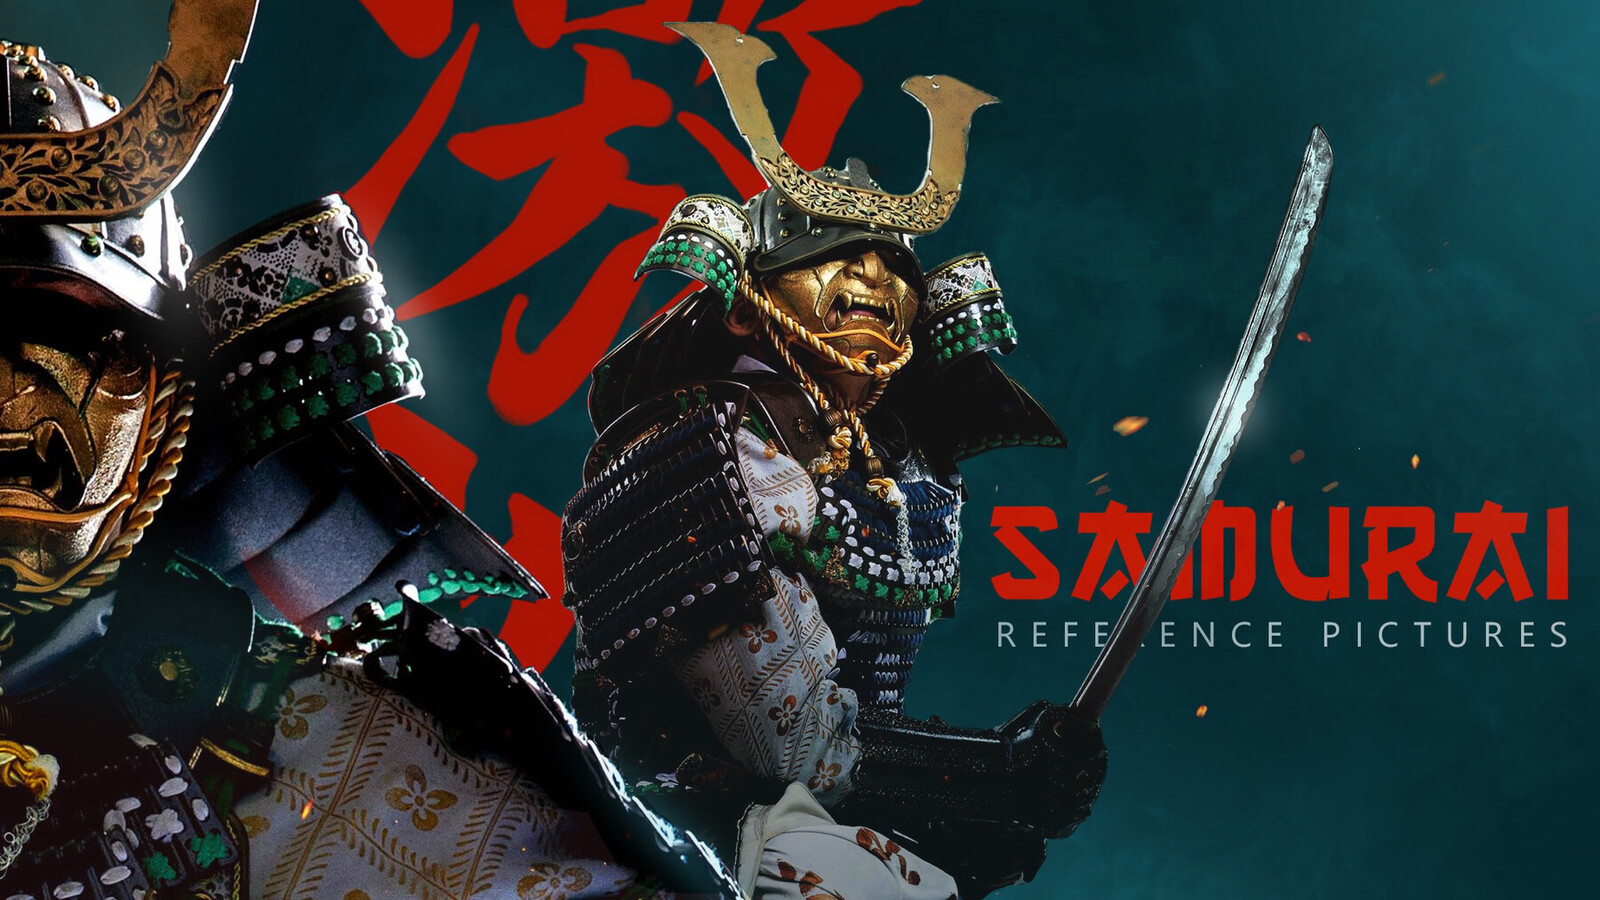 If you're in search of authentic Samurai references, we've meticulously curated an extensive collection featuring a diverse range of Samurai costumes. Be sure to explore it!
https://www.artstation.com/a/28730195